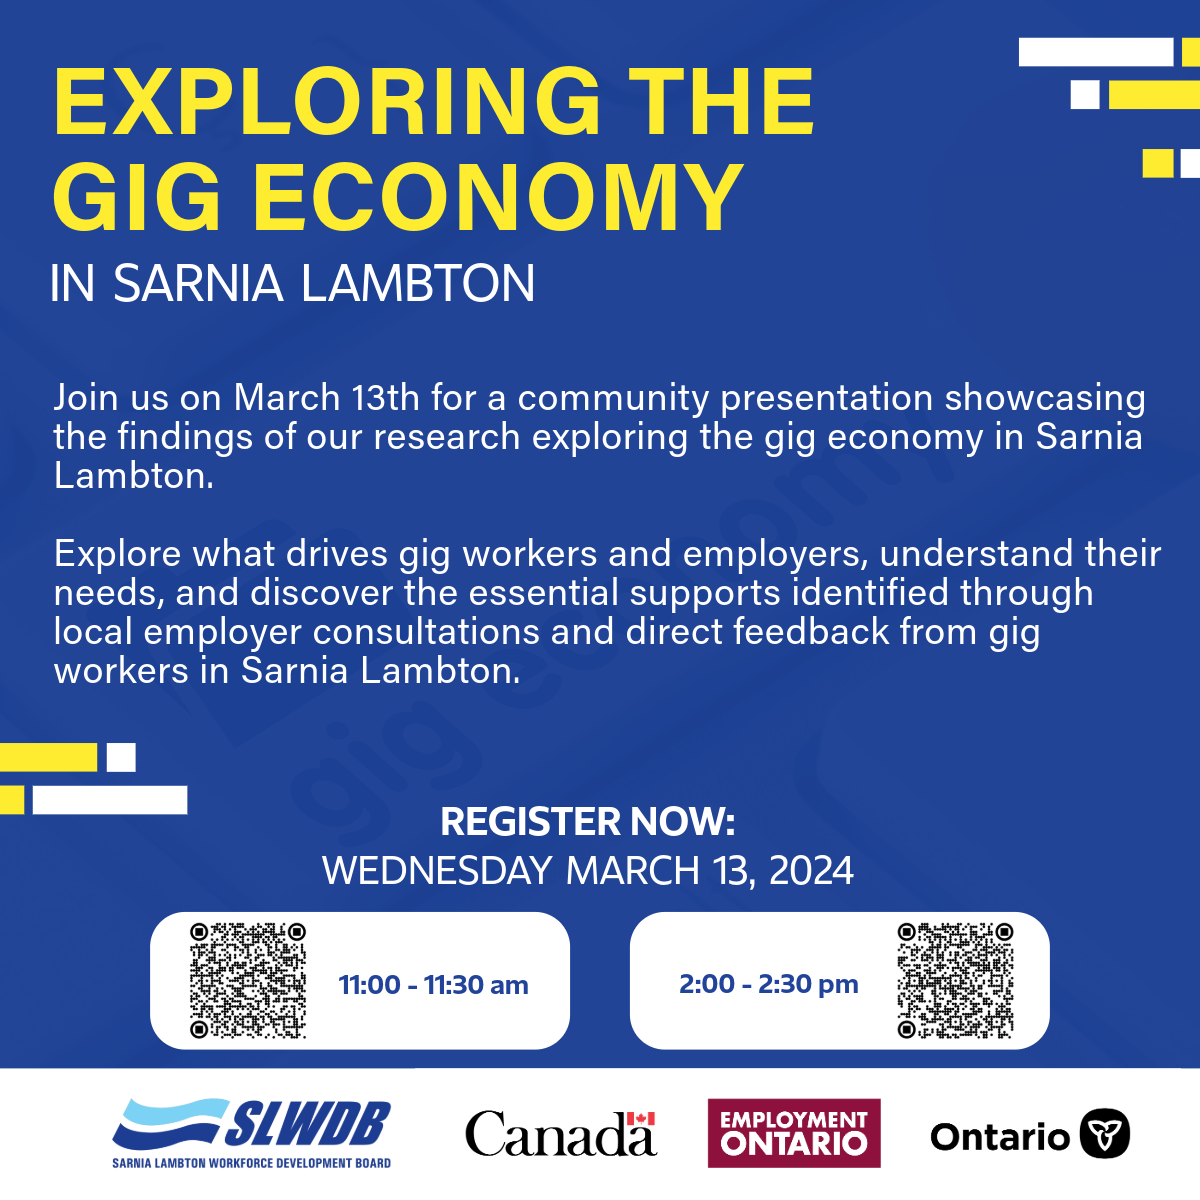 NOW AVAILABLE: Exploring the Gig Economy